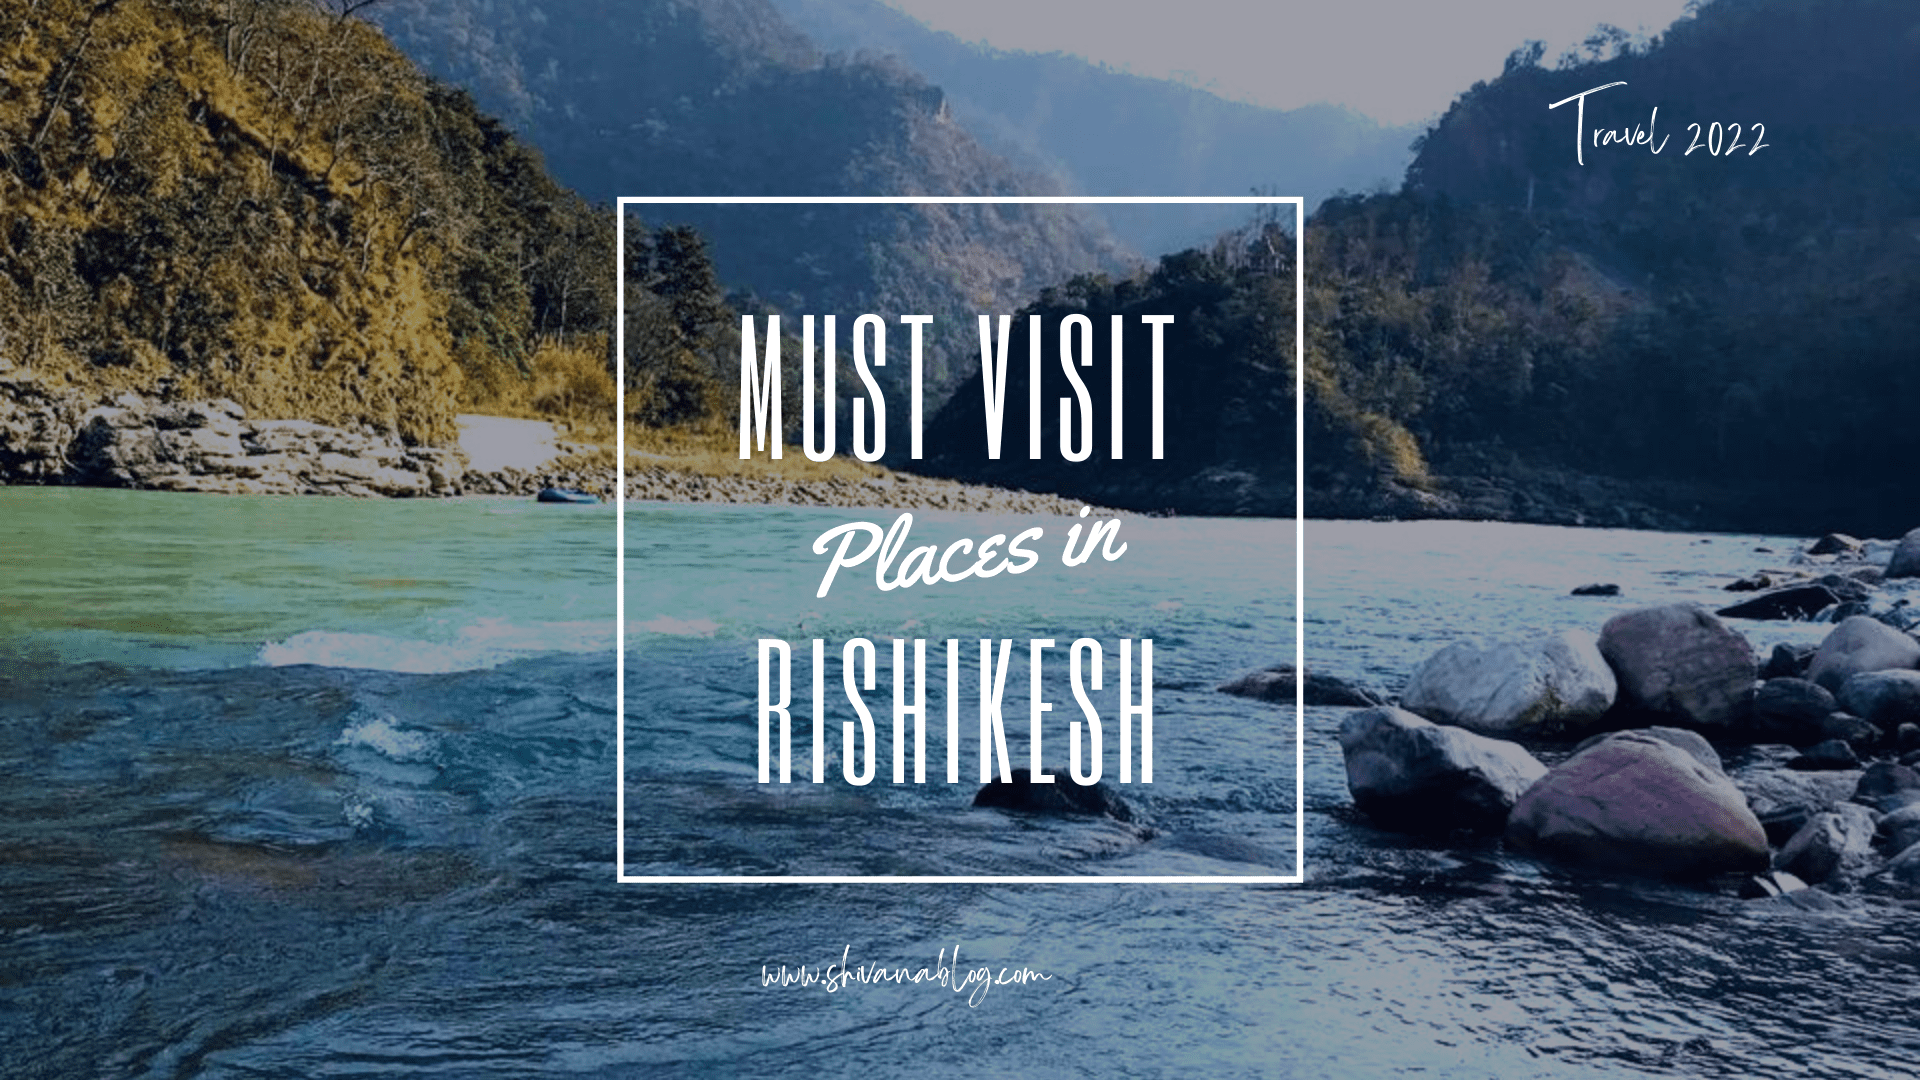 Must visit places in Rishikesh